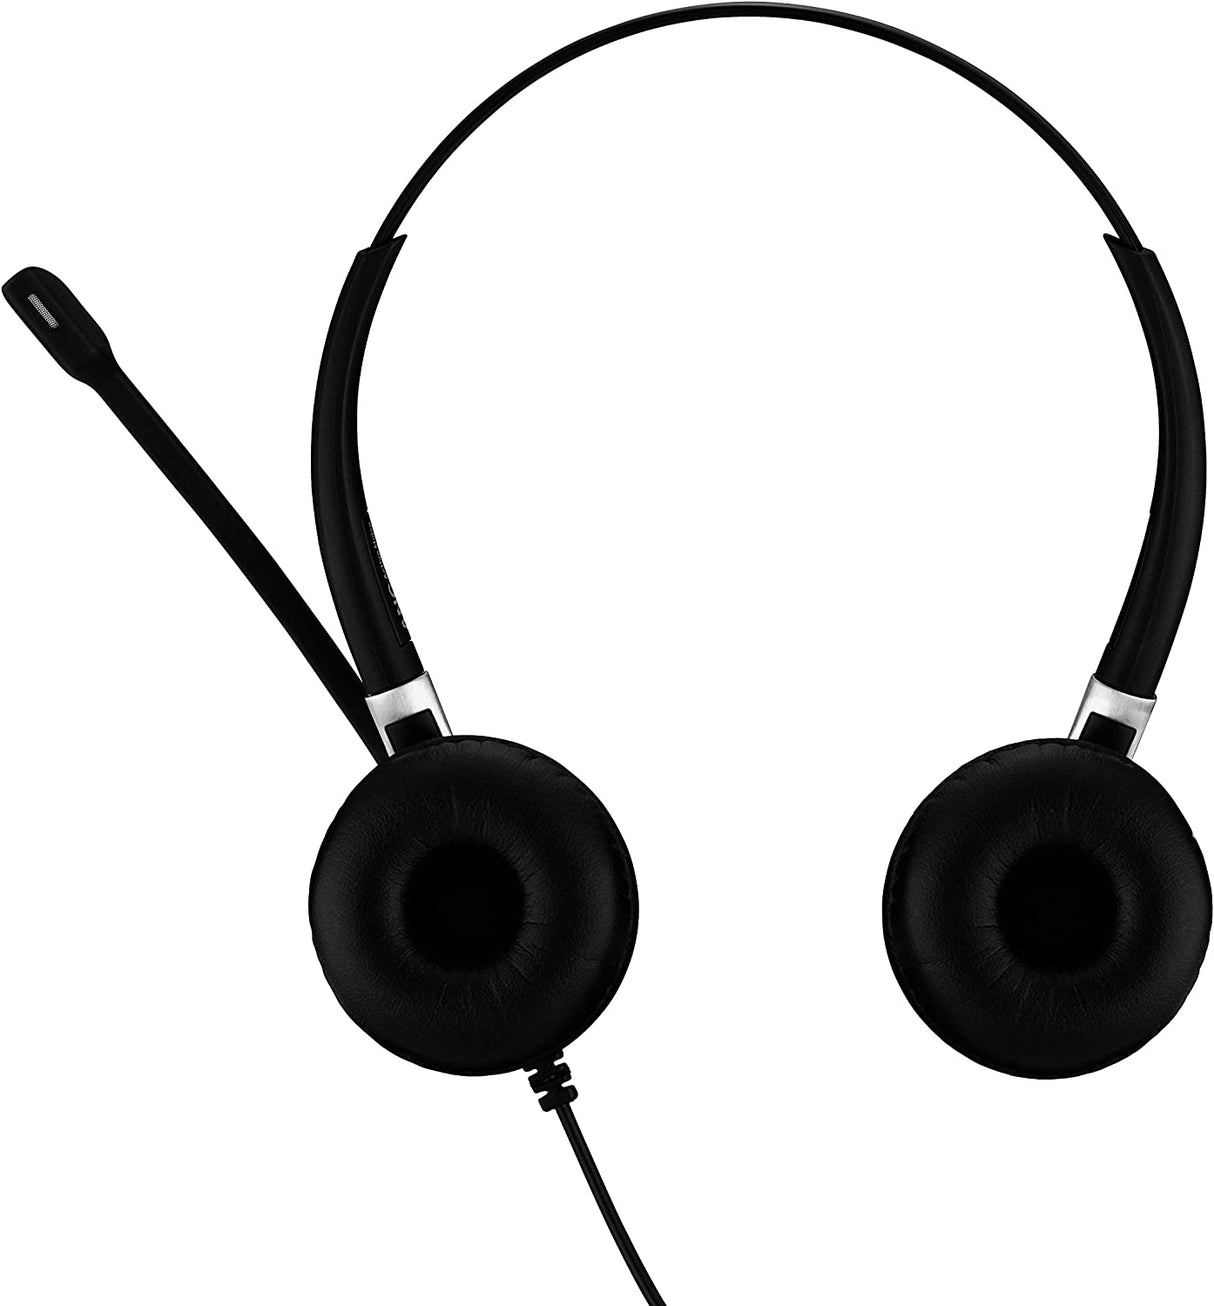 Sennheiser enterprise solution Sennheiser SC 660 ANC USB (508311) - Double-Sided (Binaural) Business Headset | for Skype for Business | with HD Sound, Active Noise Cancellation Microphone, &amp; USB Connector (Black)